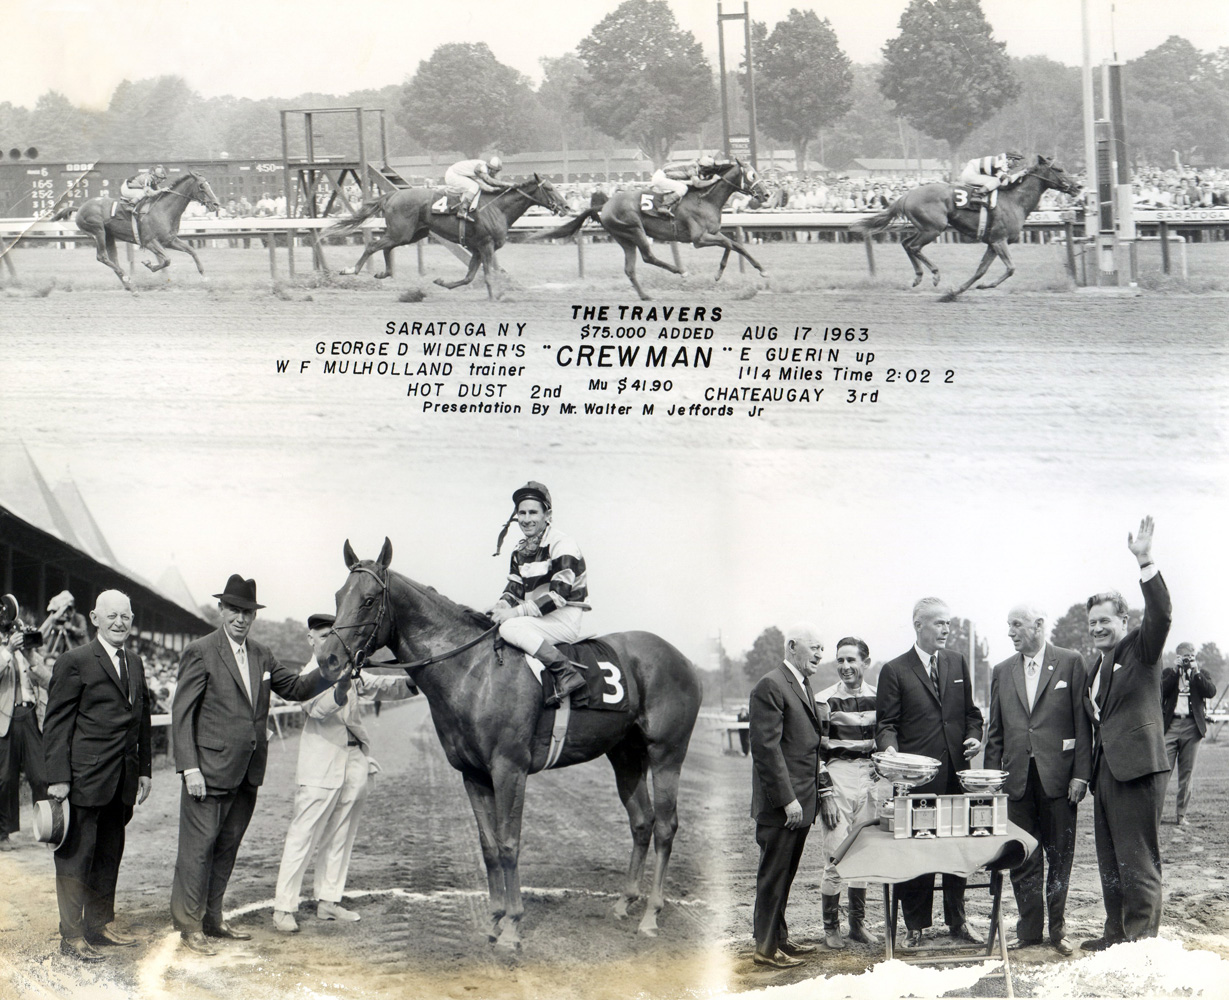 Win composite photograph for the 1963 Travers Stakes at Saratoga won by Crewman (Eric Guerin up), trained by Bert Mulholland (NYRA/Museum Collection)